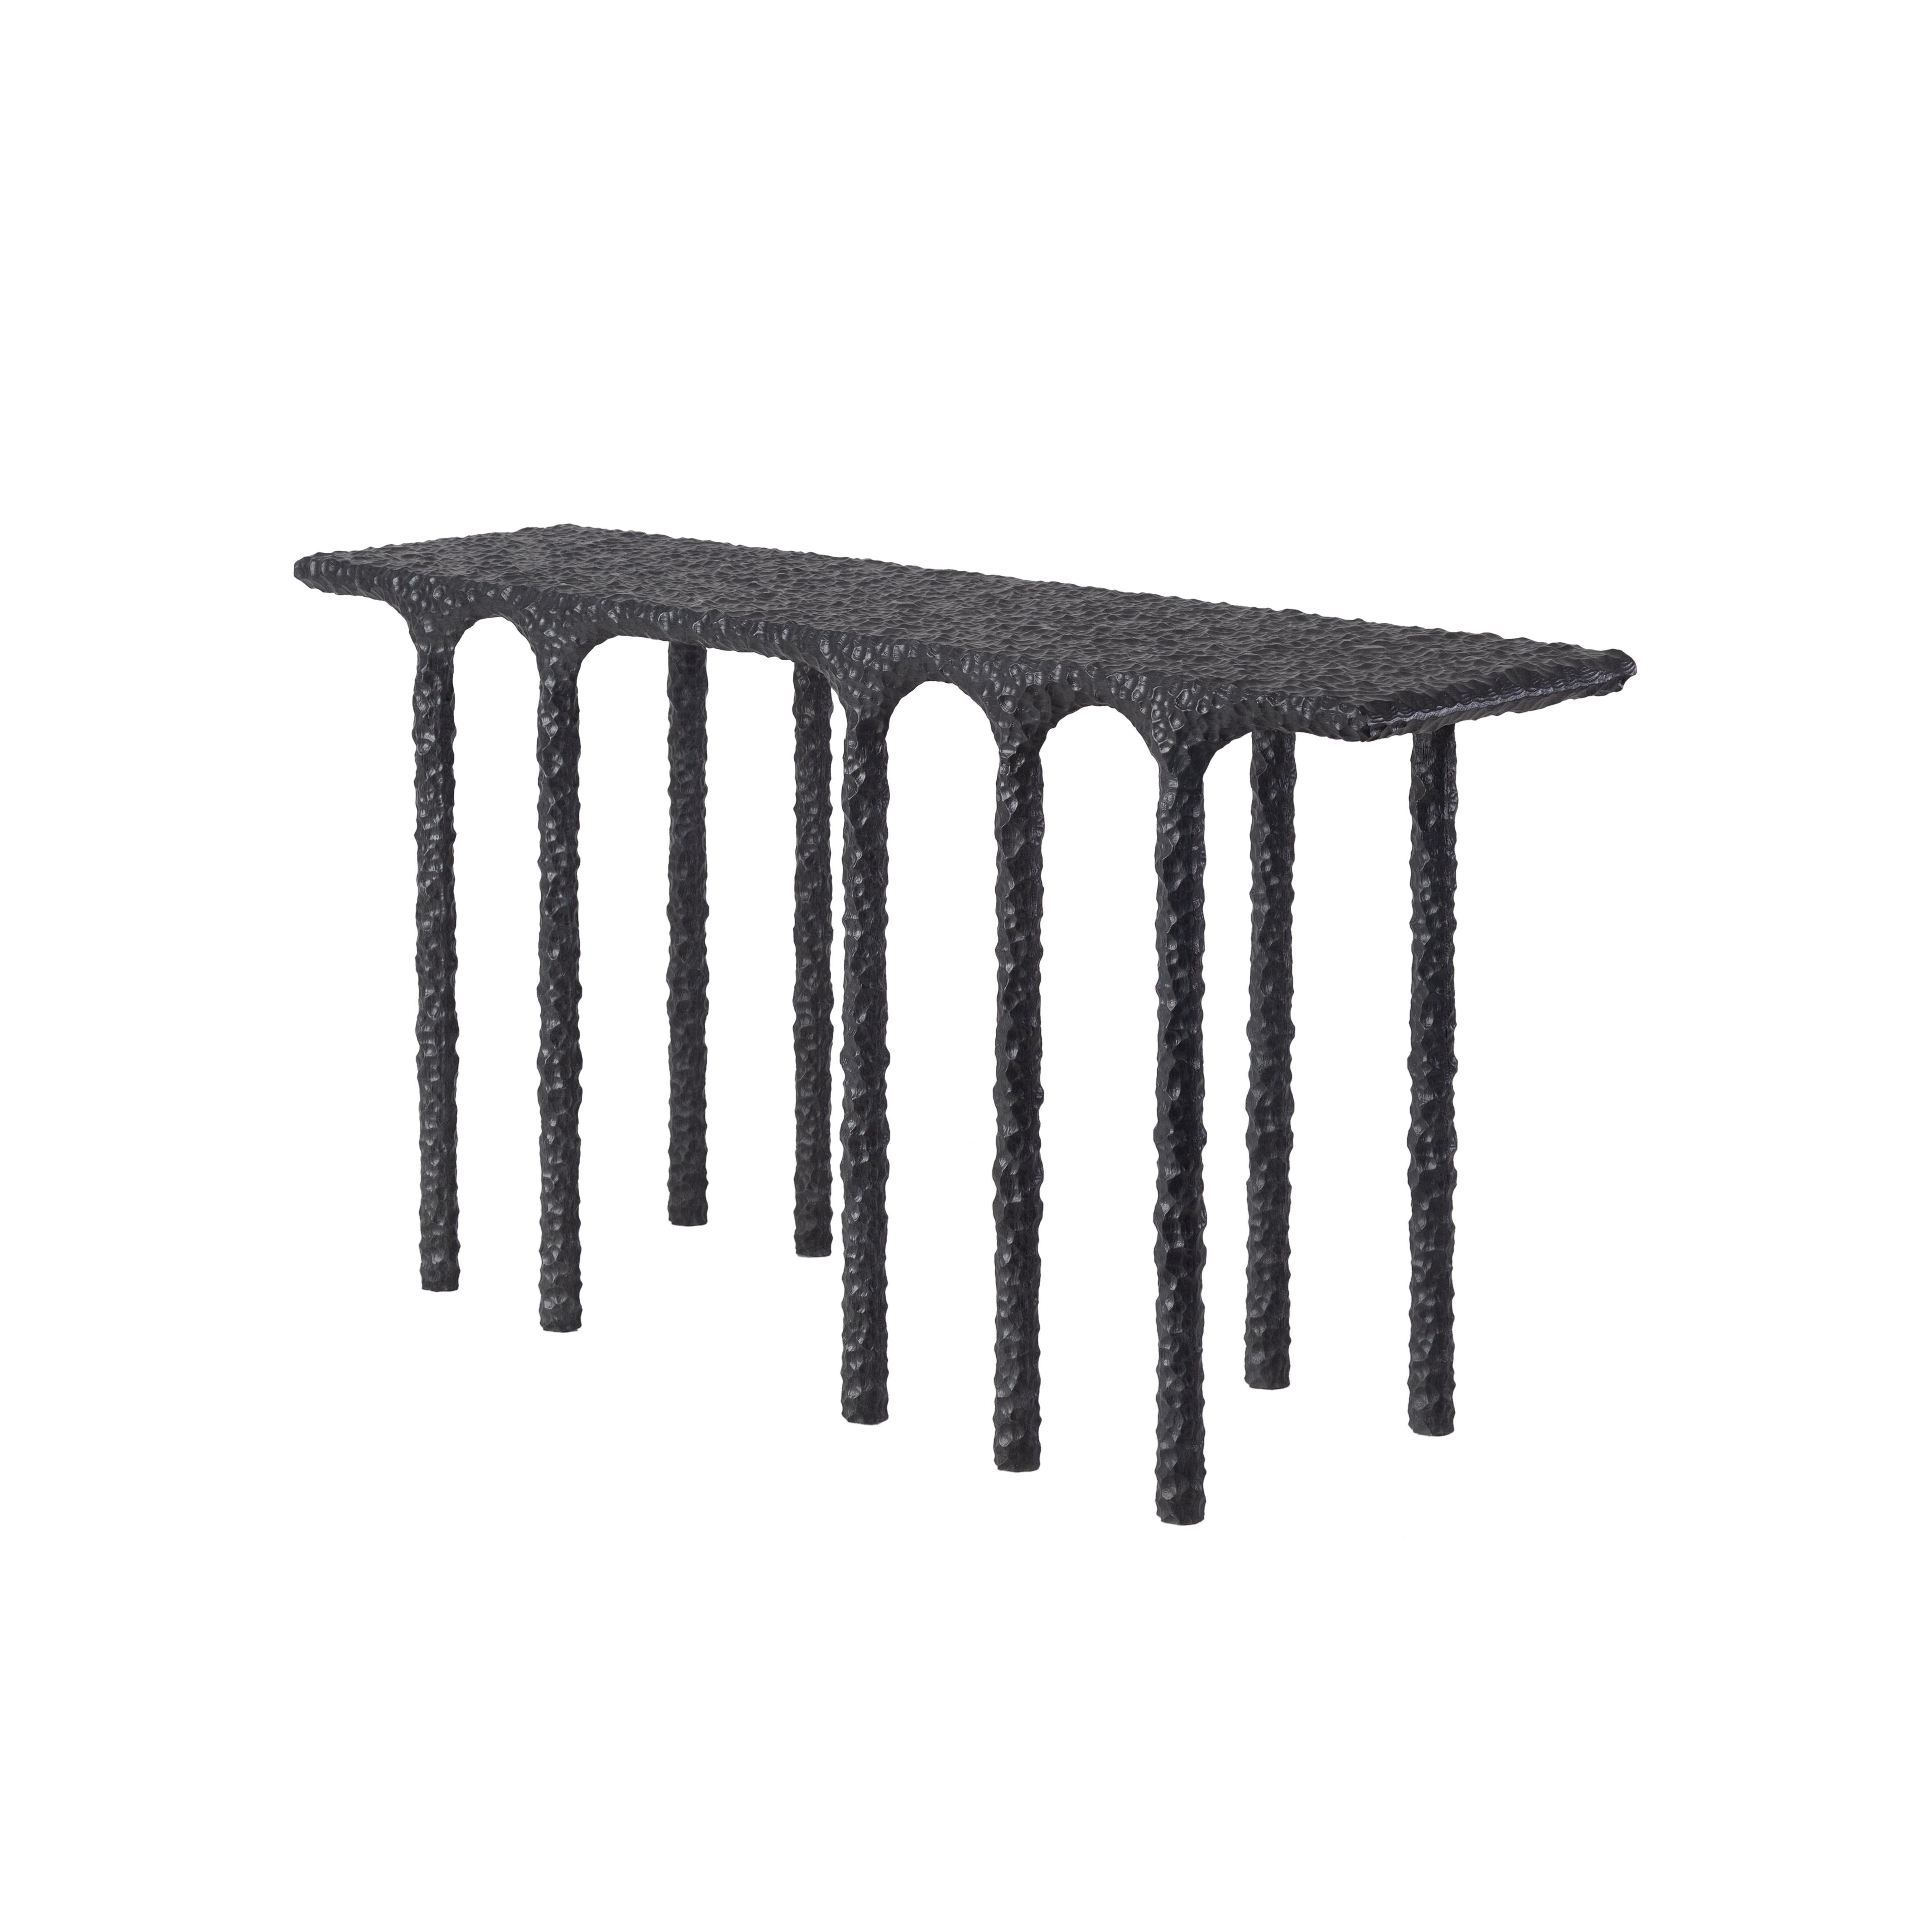 Charcoal Black Hand-Carved Massive Oak Wood Console with Multiple Arches.
Inspired by the legendary Egyptian architect Hassan Fathy, this console pays homage to his architectural philosophies and principles, from arches for ventilation, to a simpler